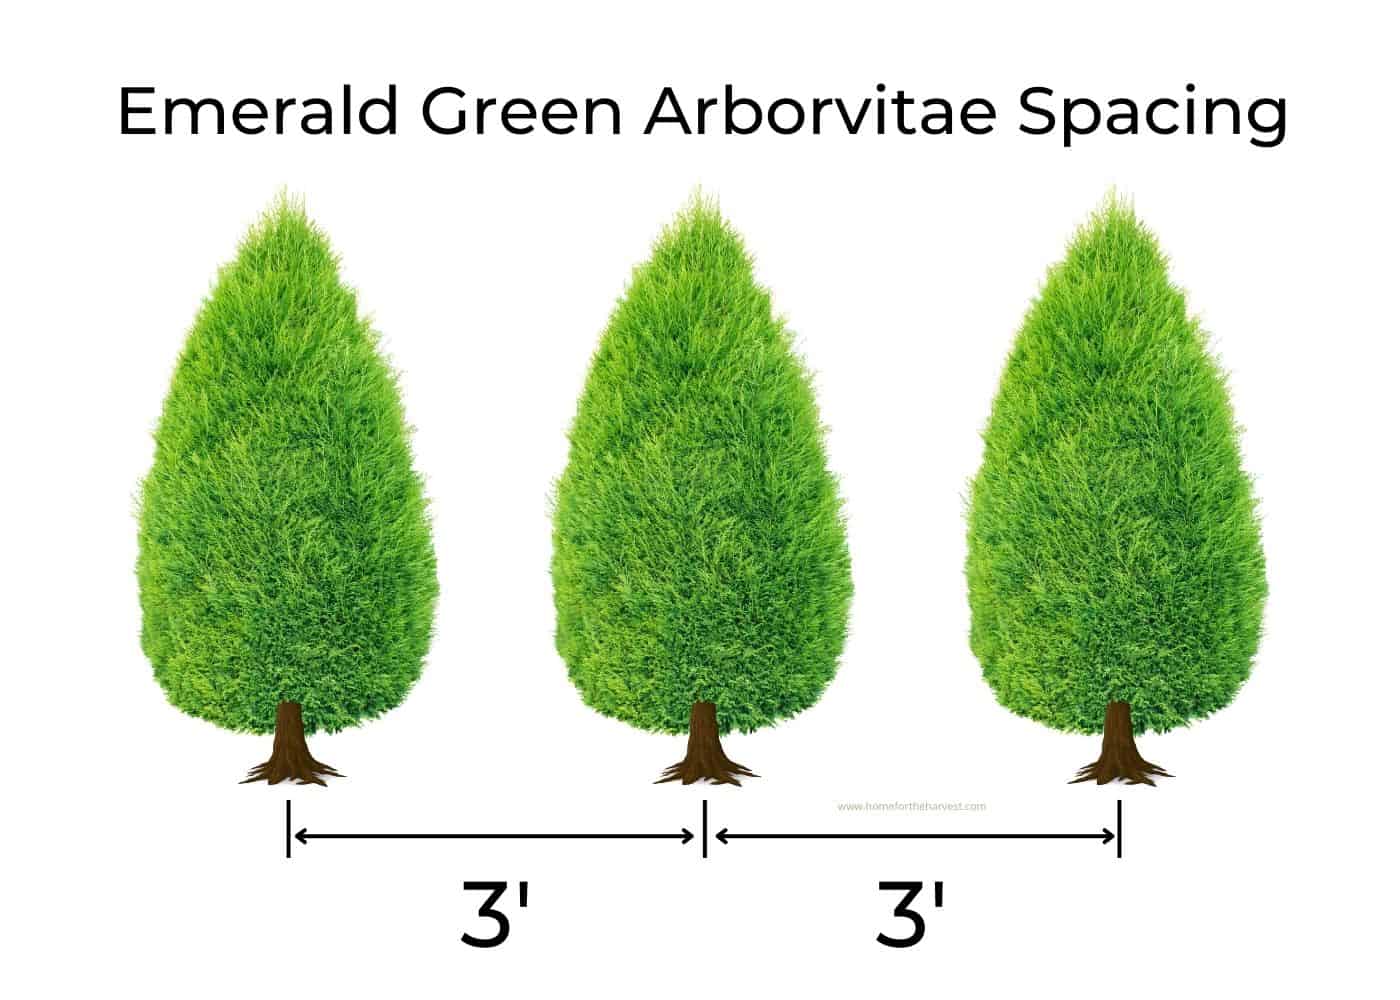 emerald green arborvitae spacing for vigorous growth | home for